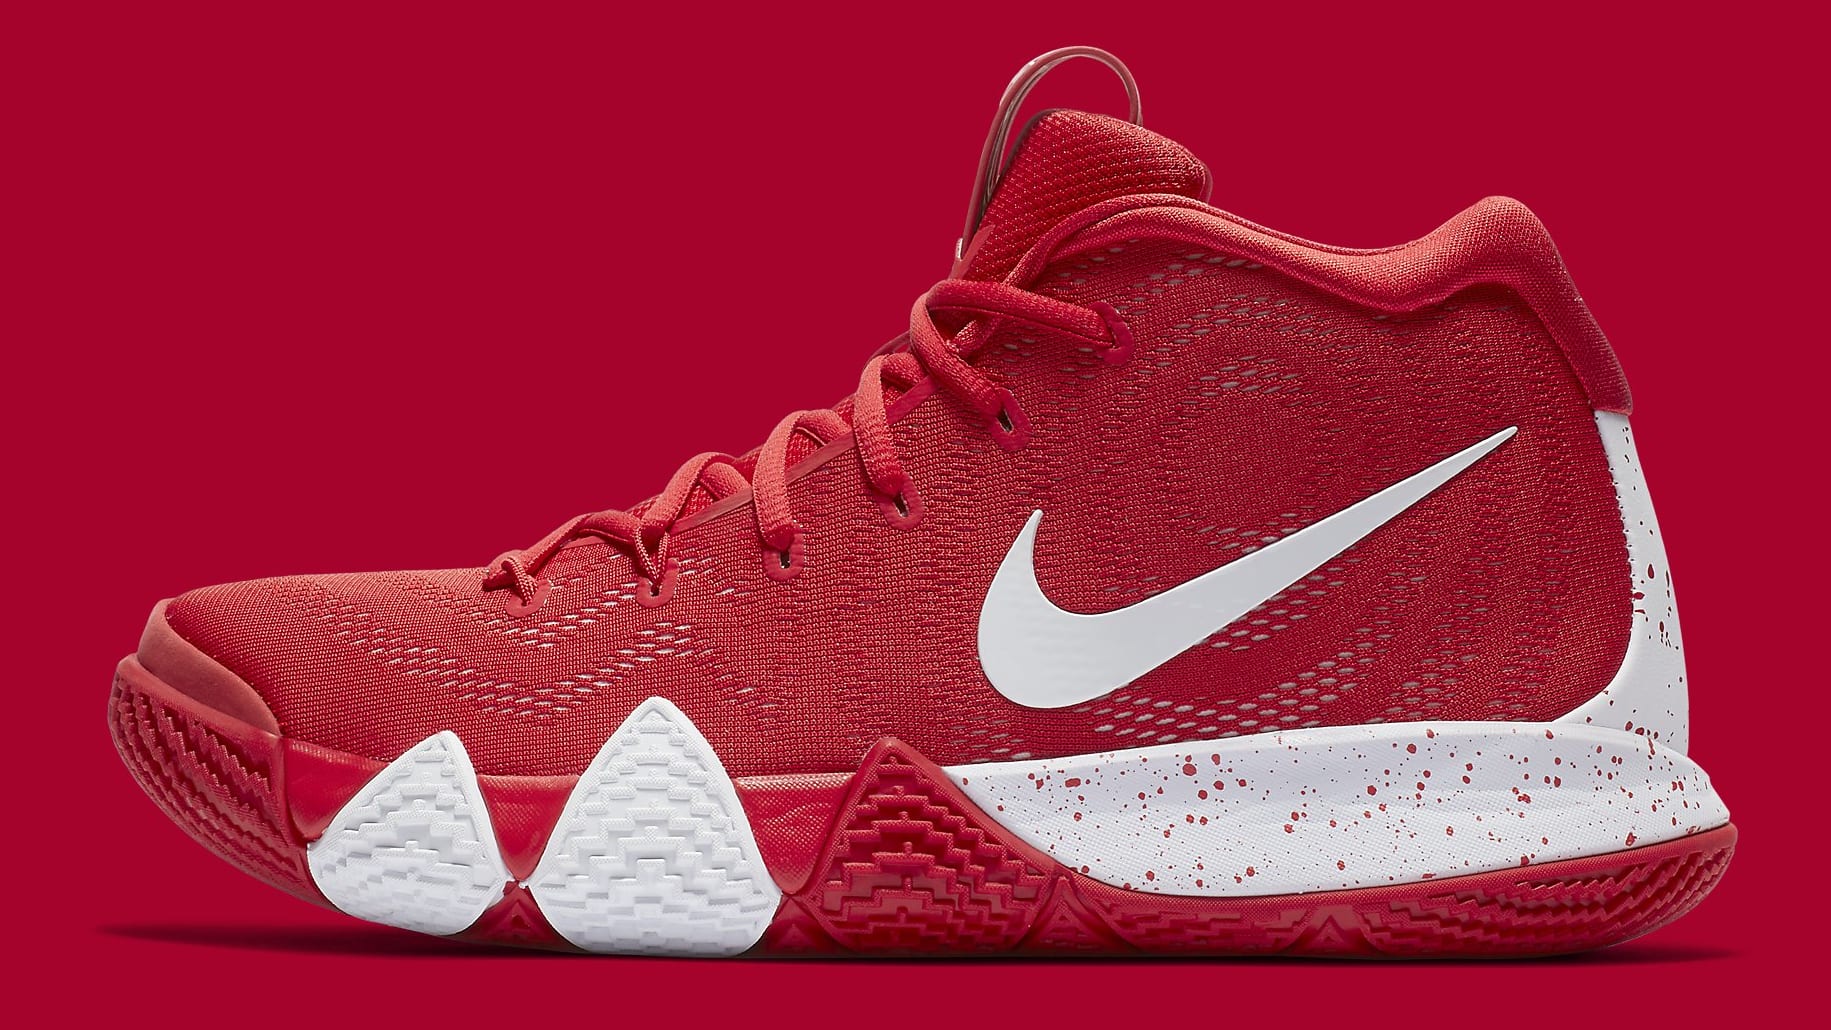 kyrie 4s red and white